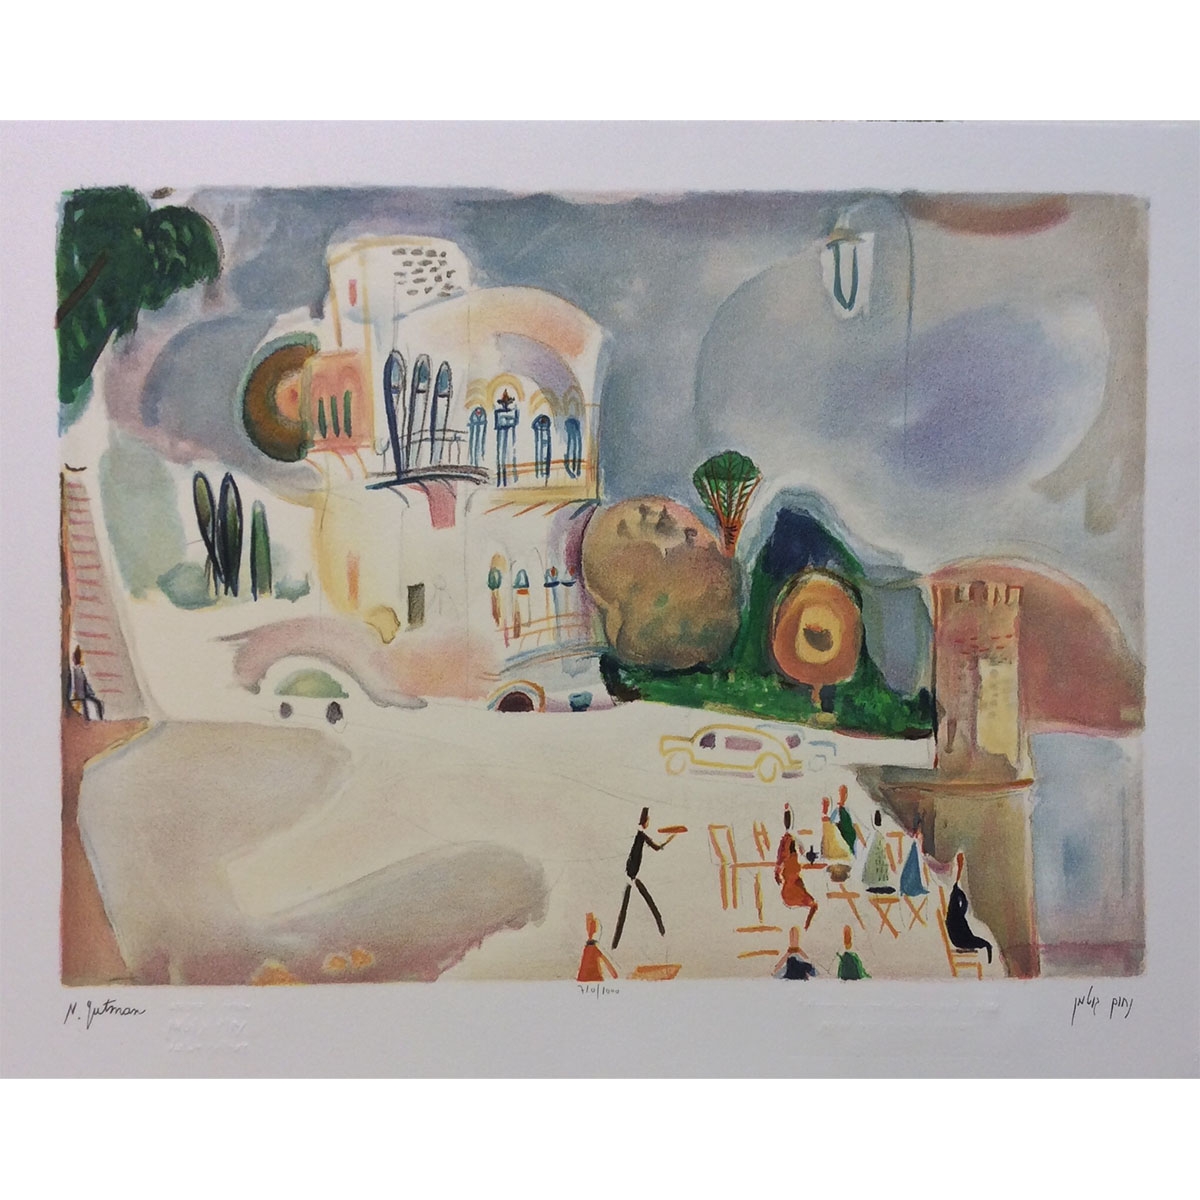  Cafe in Tiberias. Artist: Nahum Gutman. Signed & Numbered Limited Edition Lithograph - 1